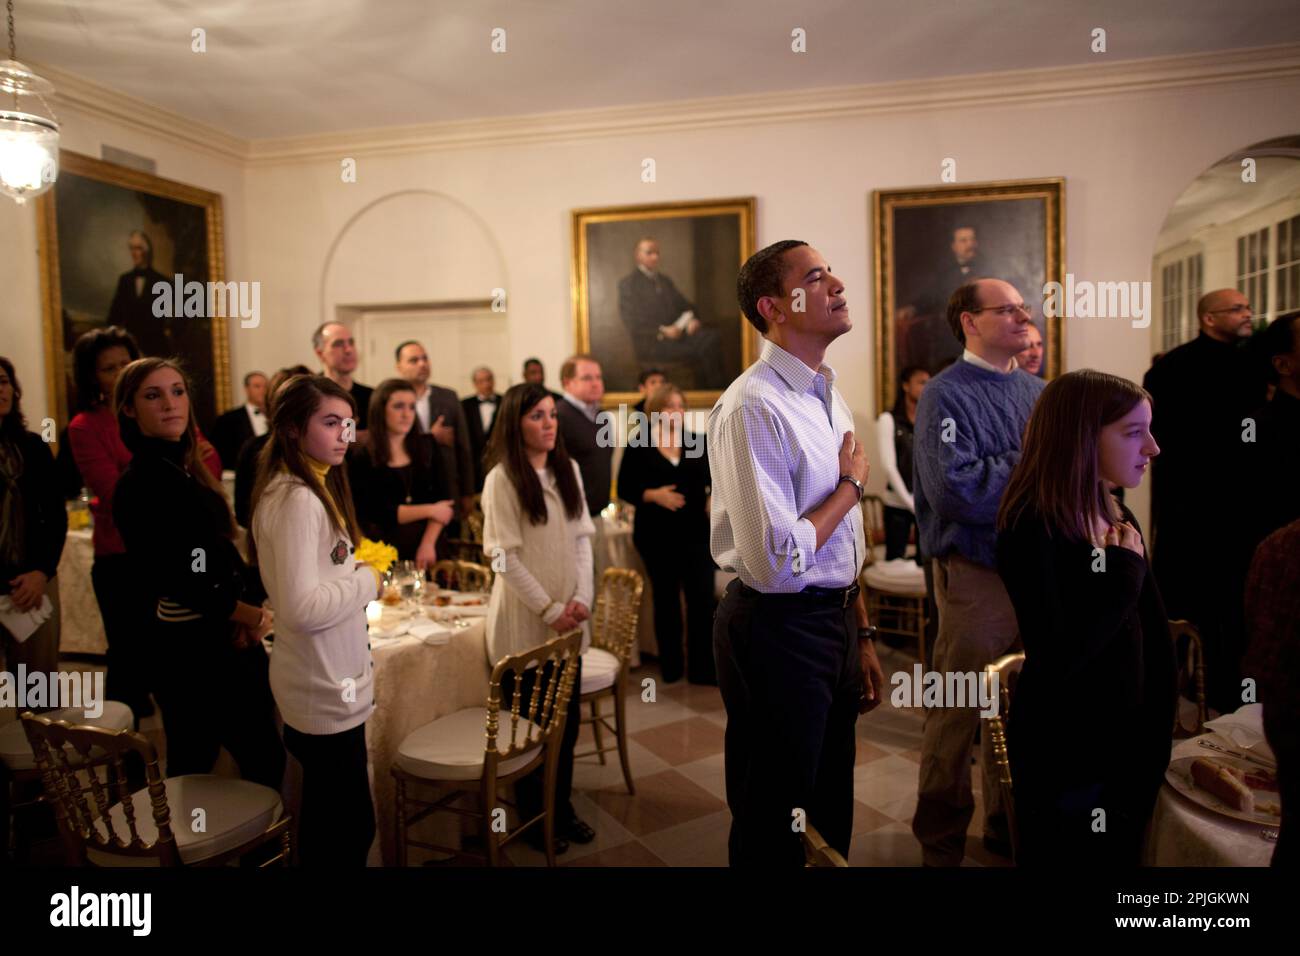 President Barack Obama with his hand on his heart as the National Anthem is played, prior to Super Bowl game kickoff, Arizona Cardinals vs. Pittsburgh Steelers in the East Garden Room of the White House 2/1/09. Official White House Photo by Pete Souza Stock Photo